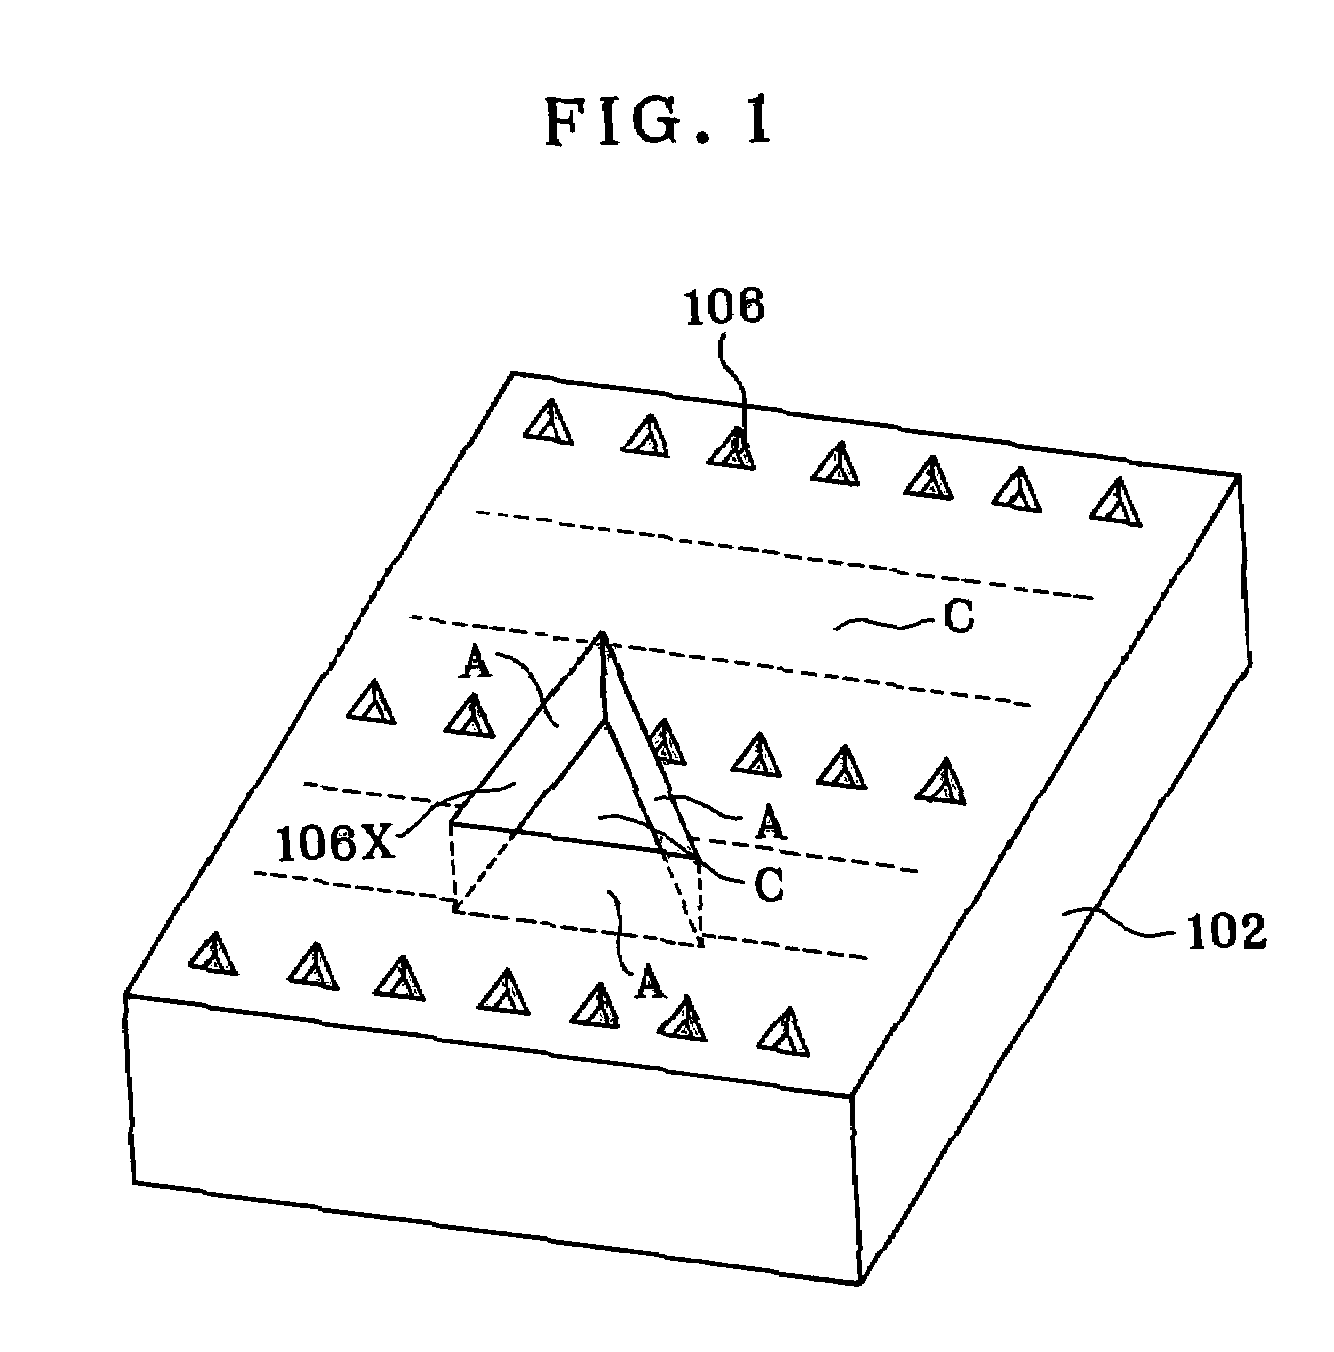 Nitride semiconductor device, and its fabrication process